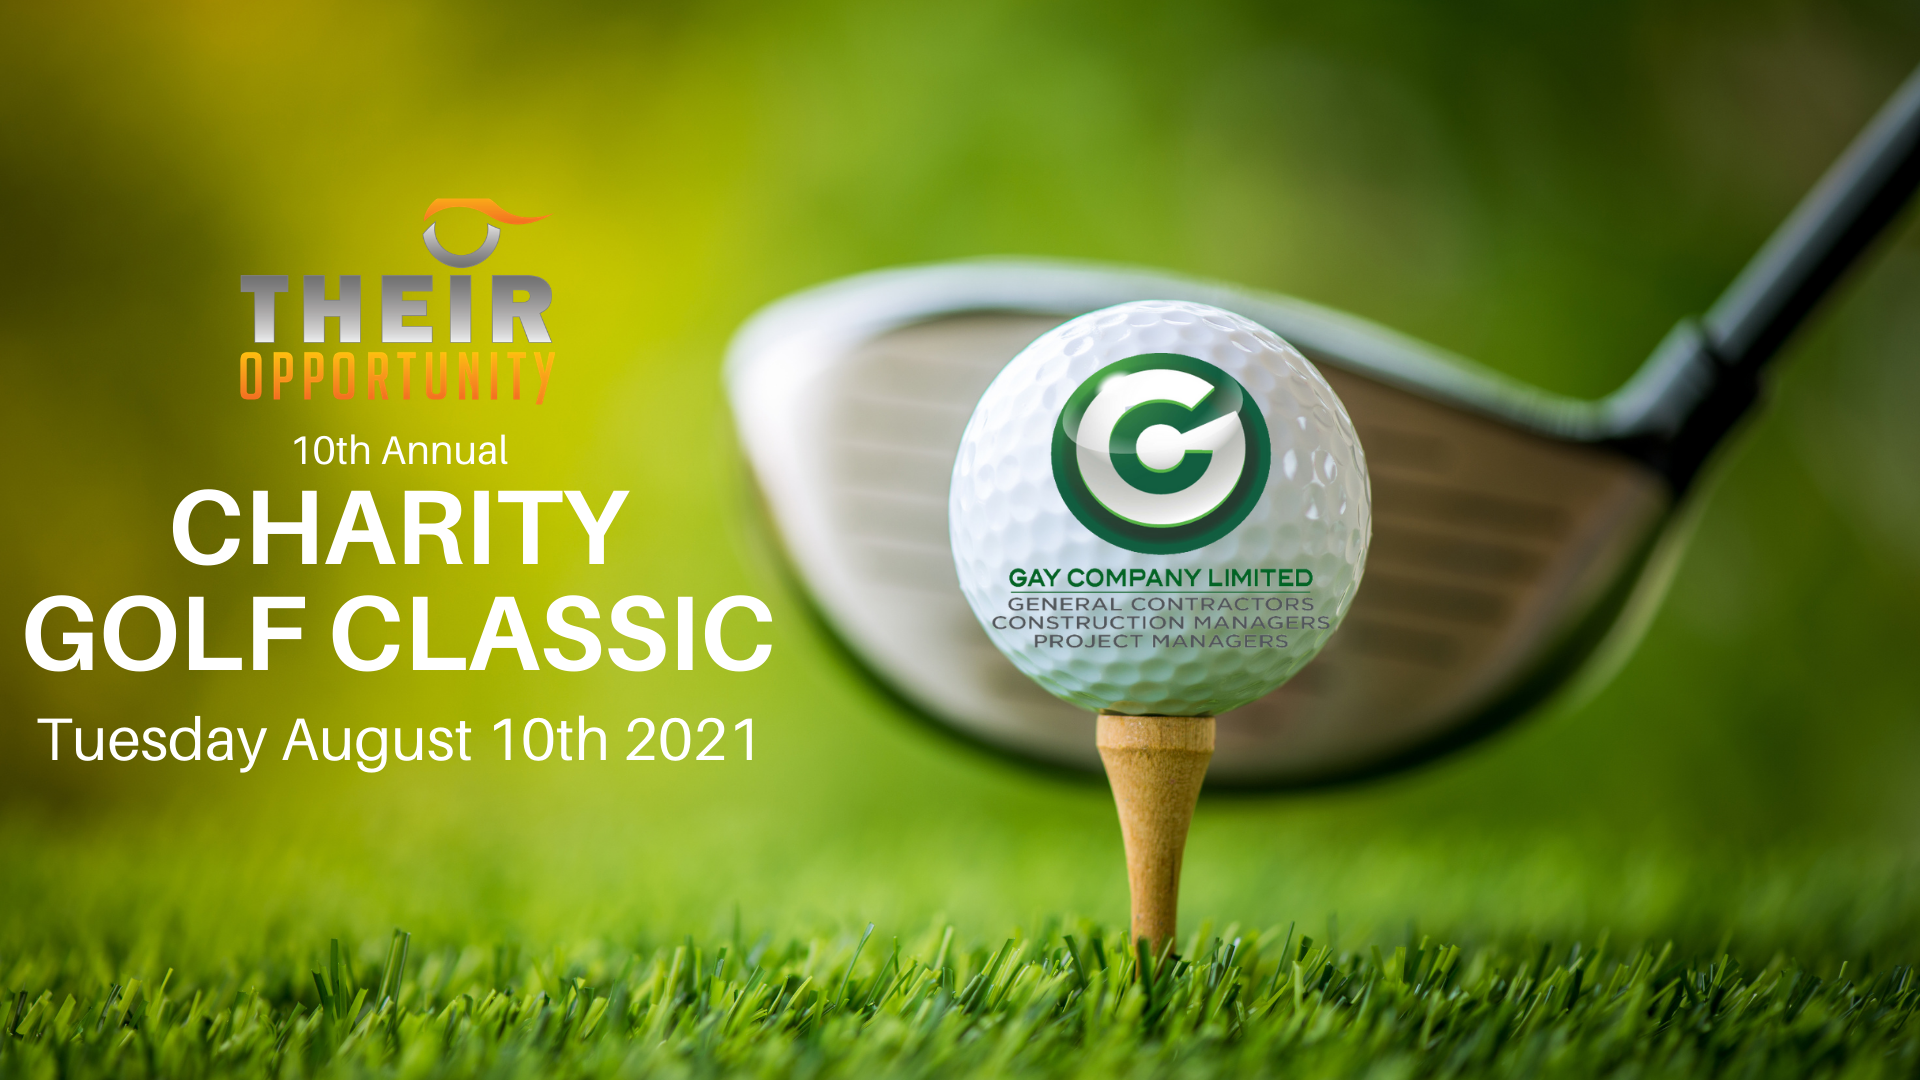 Their Opportunity Golf Classic Presented by Gay Company Limited